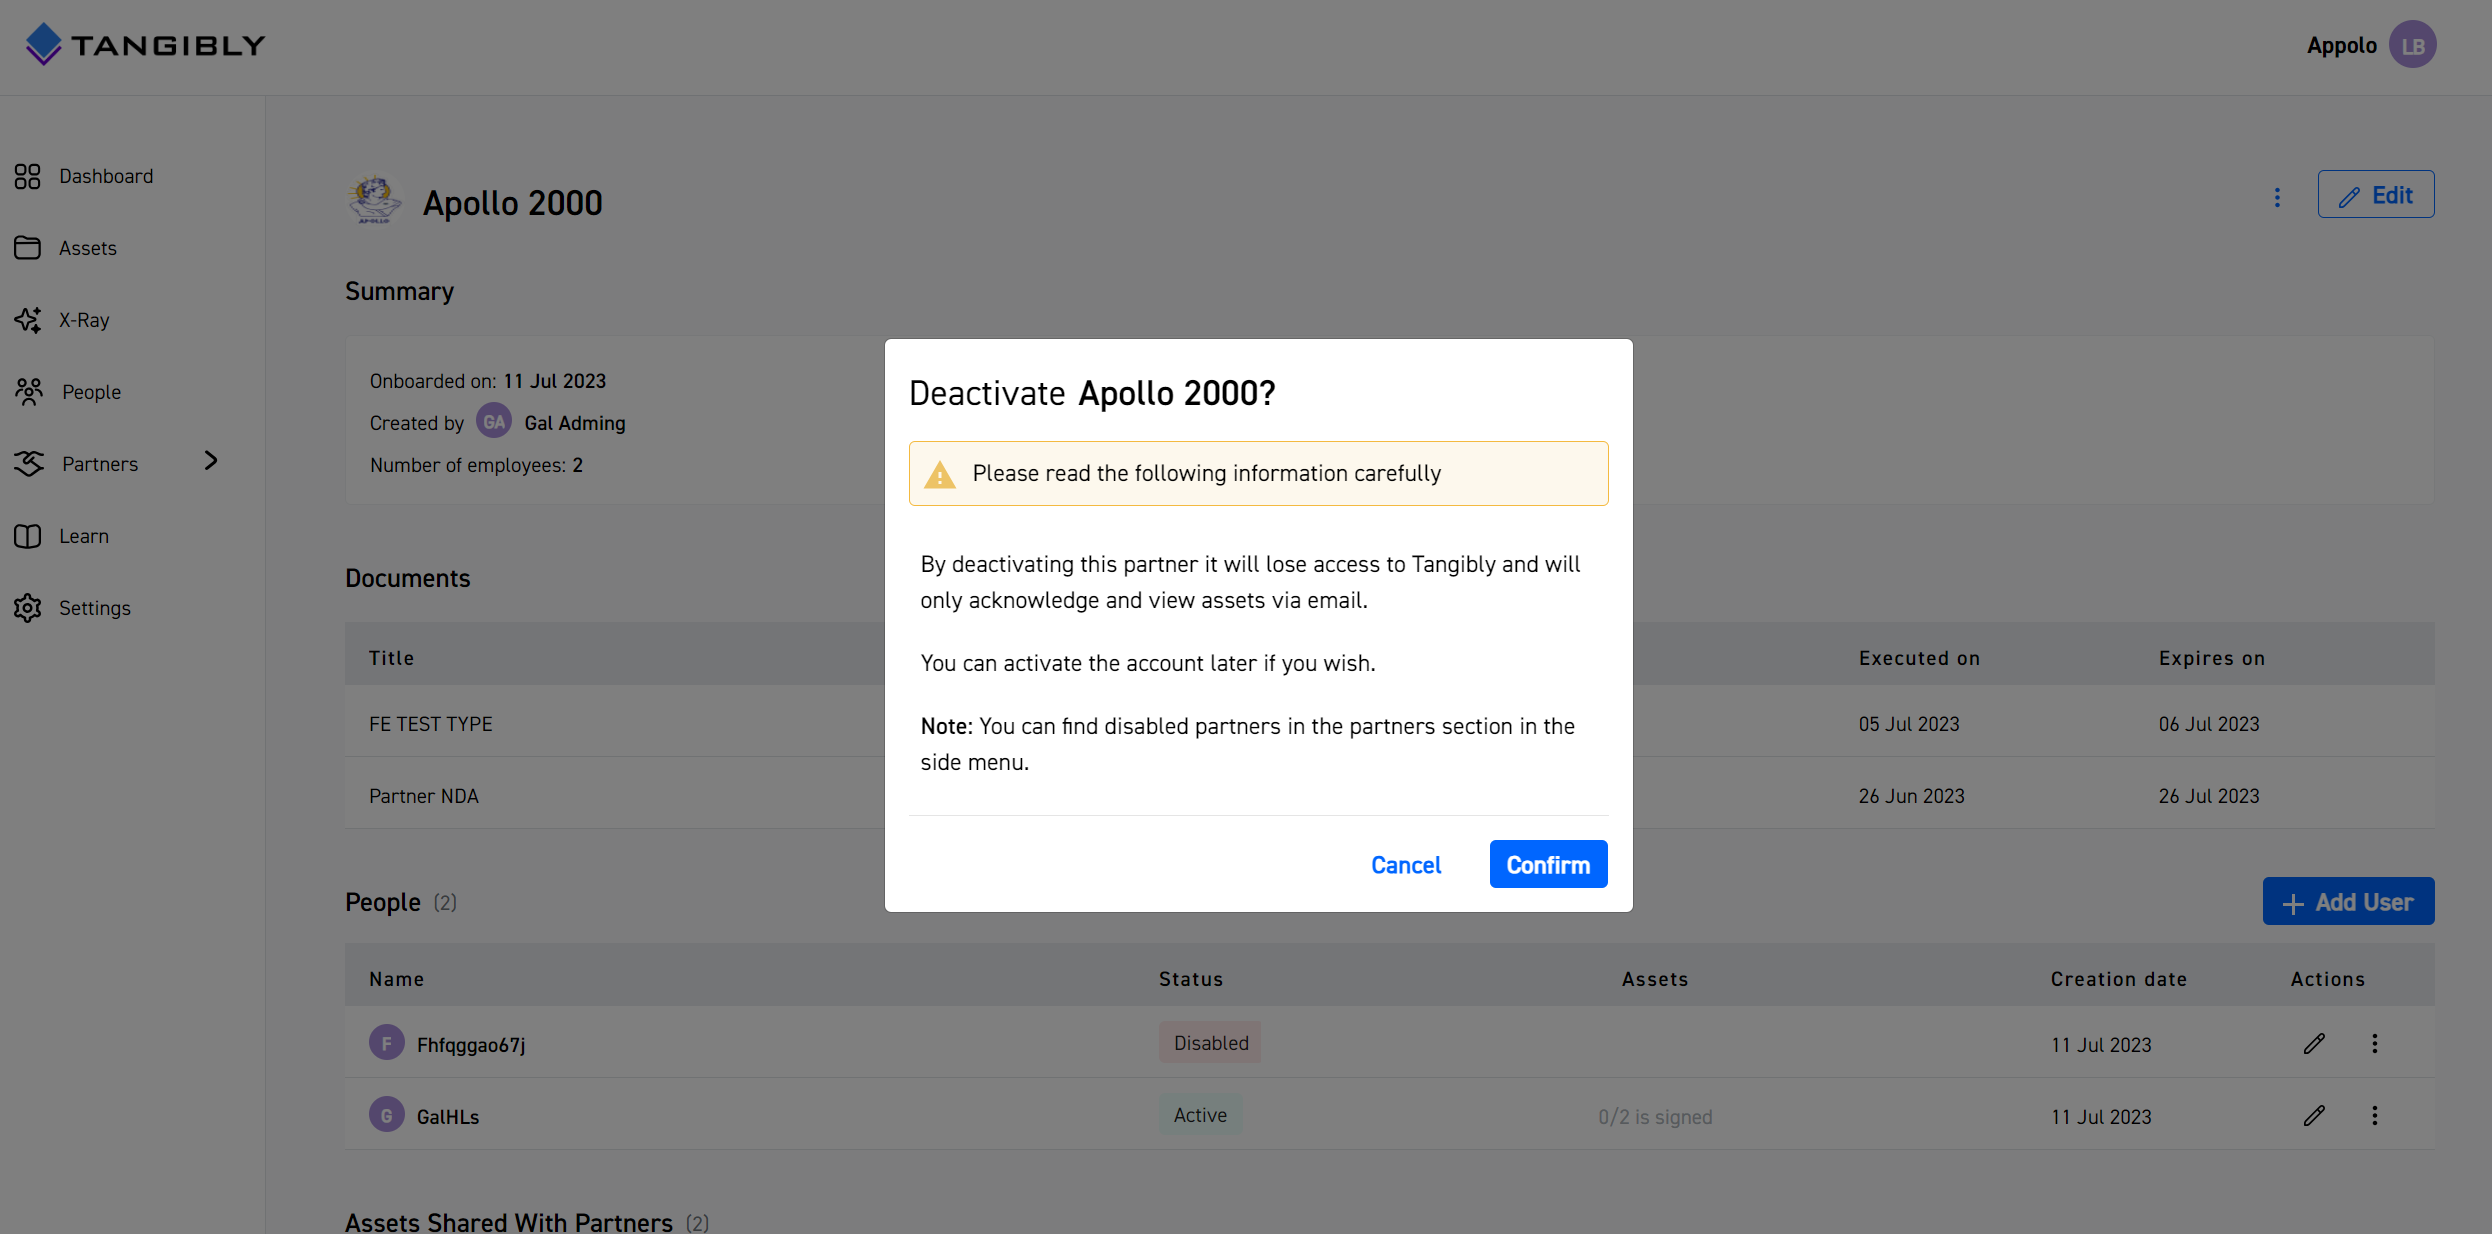 Tangibly: Deactivating a partner screen